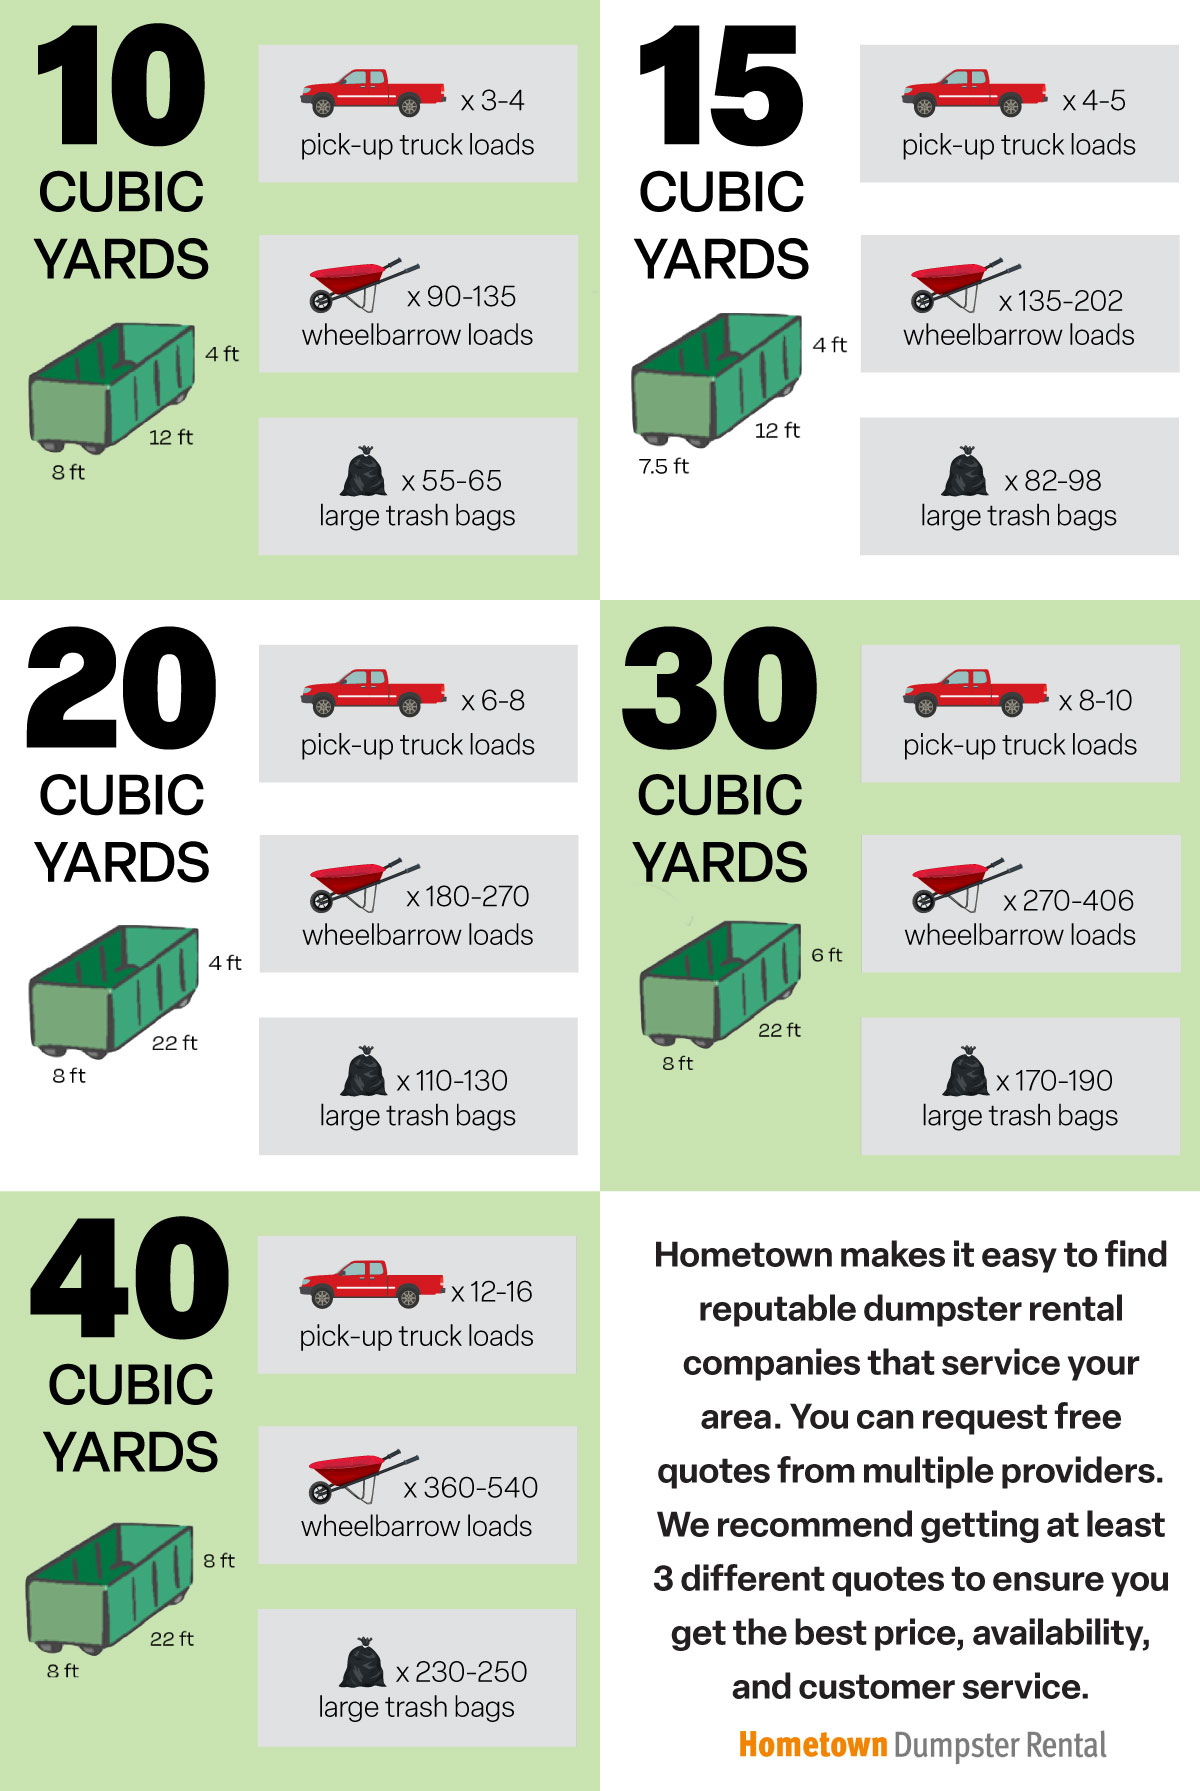 dumpster sizes, dimensions, and loading capacities infographic